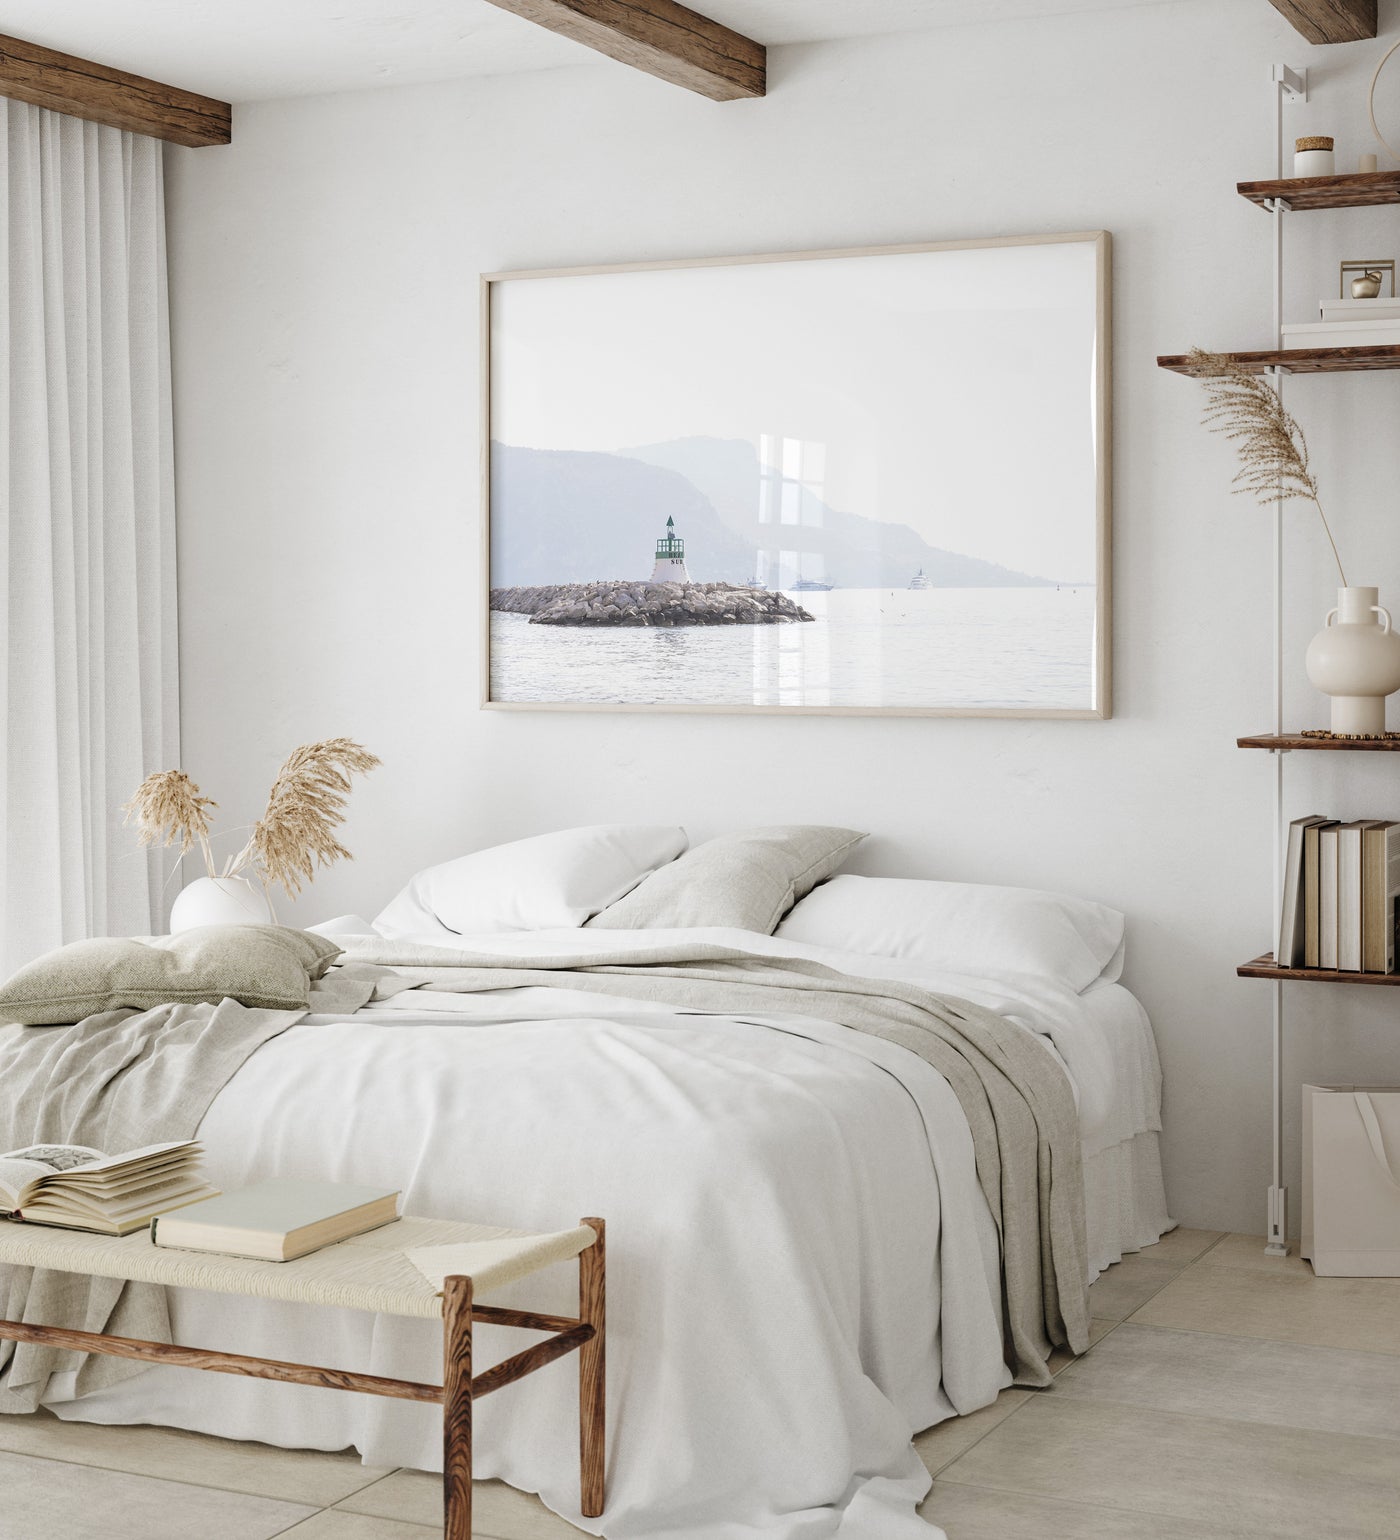 Morning Haze - Fine art print by Cattie Coyle Photography in bedroom